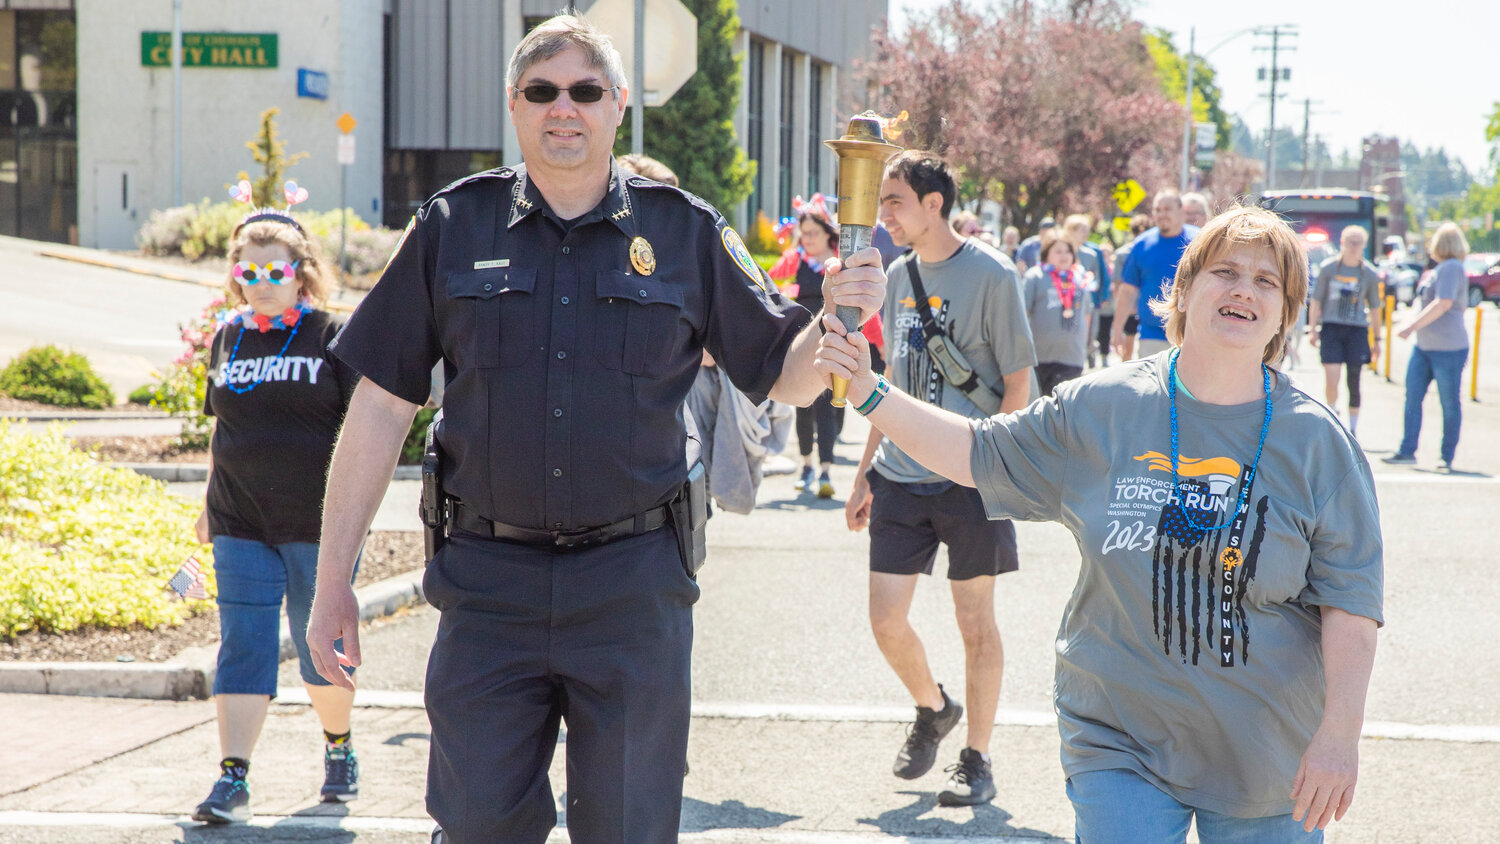 Chehalis Police Chief Randy Kaut holds the torch with participants in the Lewis County Special Olympics Law Enforcement Torch Run on Friday, June 2.